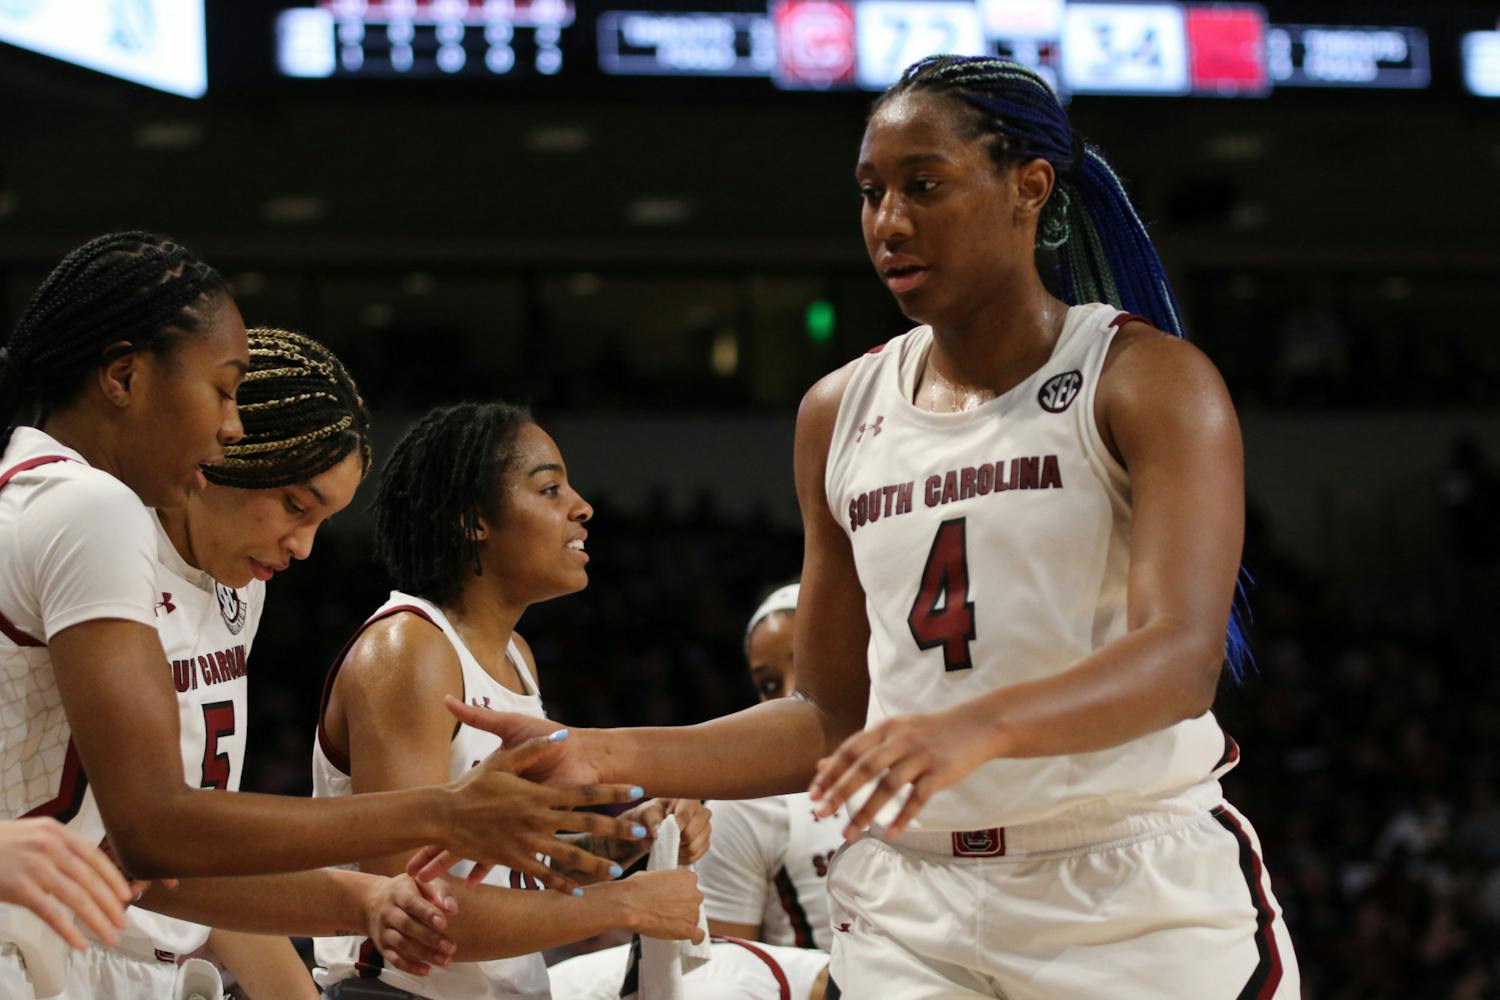 The South Carolina Gamecocks women's basketball team dominated the Arkansas Razorbacks 92-46 in a historic game at Colonial Life Arena in Columbia, SC, on Jan. 22, 2023. Senior forward Aliyah Boston recorded her 73rd double-double, the most in Gamecock women's basketball history, and the Gamecocks are now 8-0 in the SEC, having defeated every opponent they've faced this 鶹С򽴫ý.&nbsp;